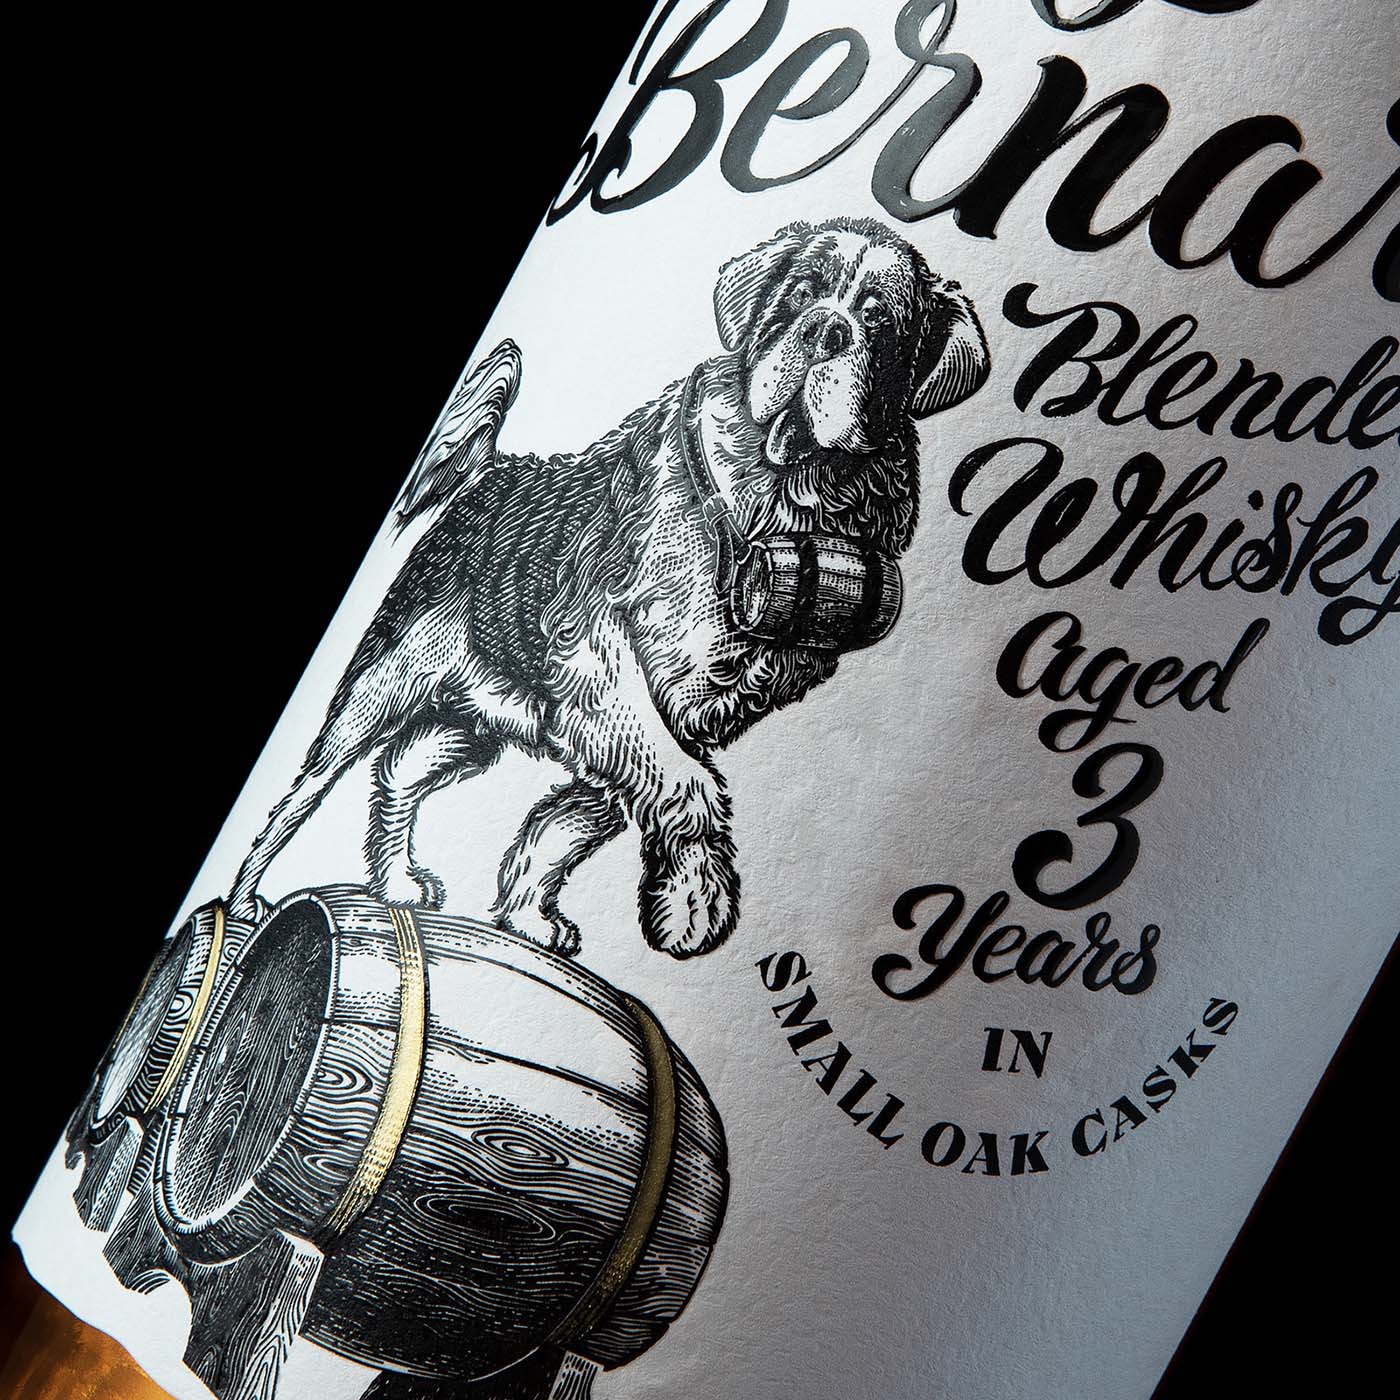 Label Design for Barry Bernard Whiskey Collection Featuring the St. Bernard Dog